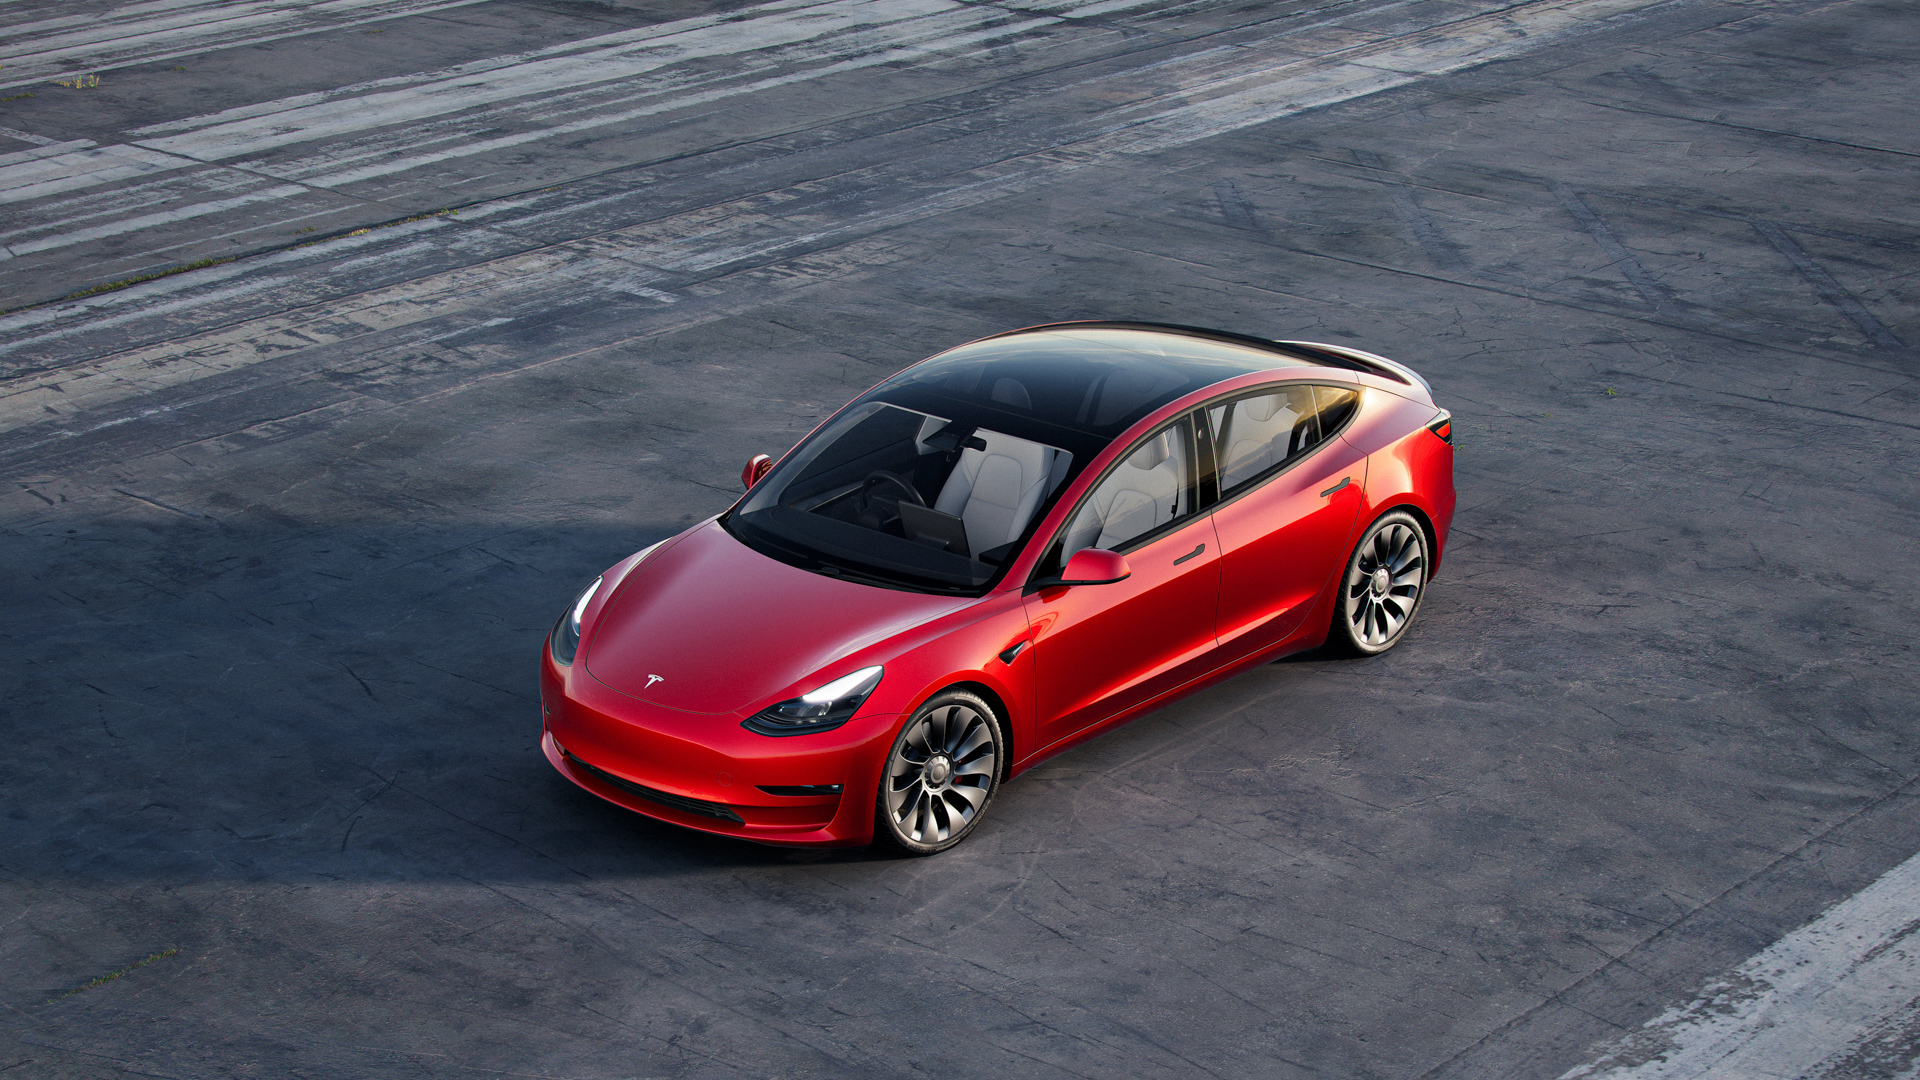 Tesla ditches ultrasonic sensors, moves completely to Tesla Vision